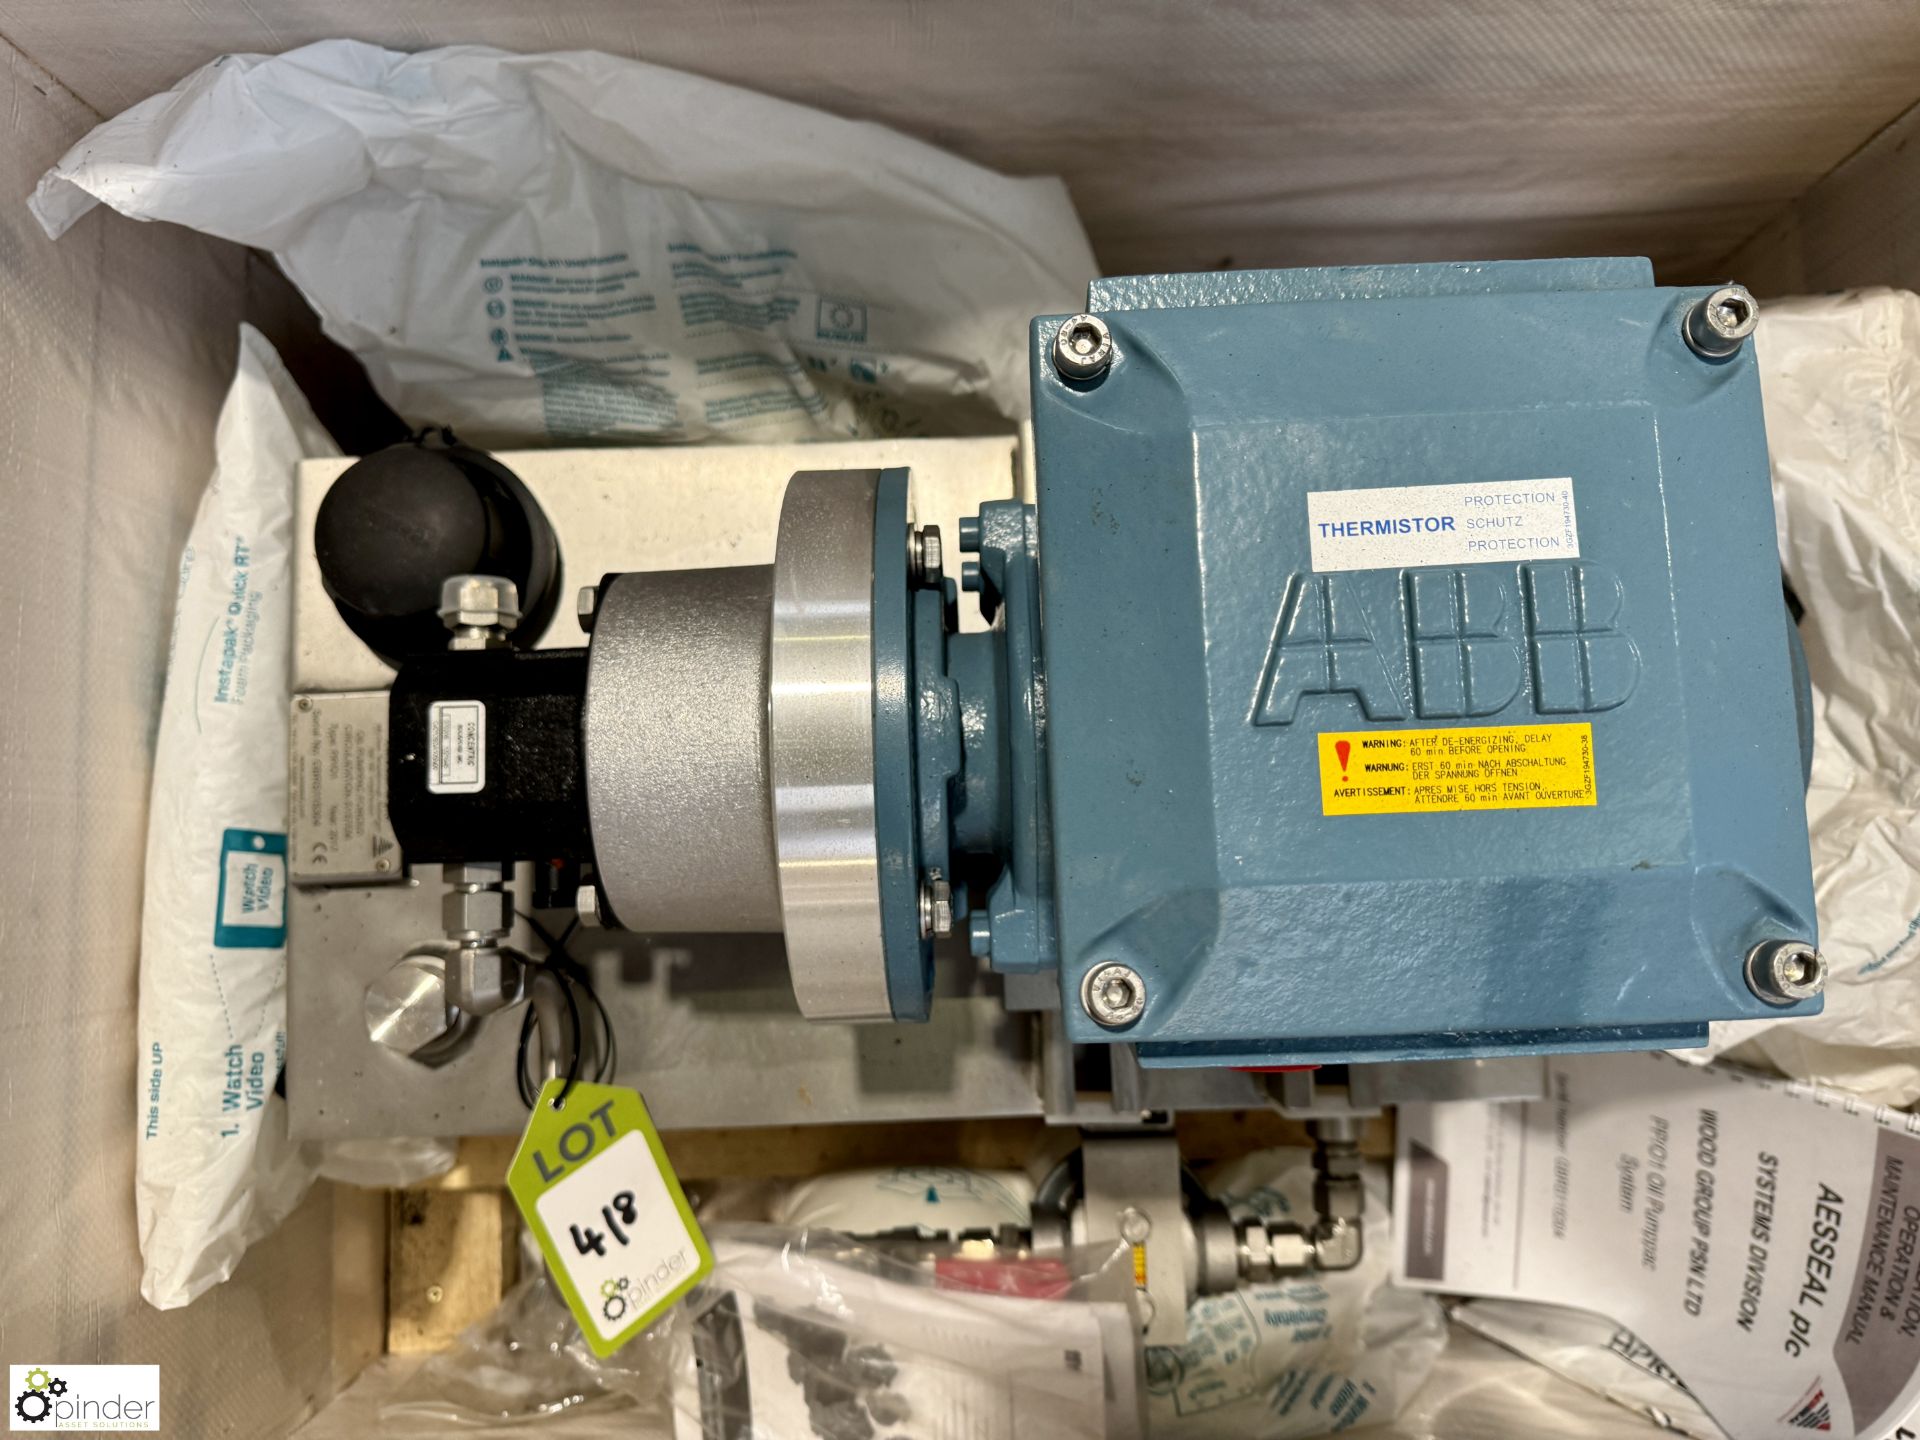 AE Seal PP/01 stainless steel hydraulic Oil Pump Pack, year 2017, unused with ABB frameproof - Image 2 of 8